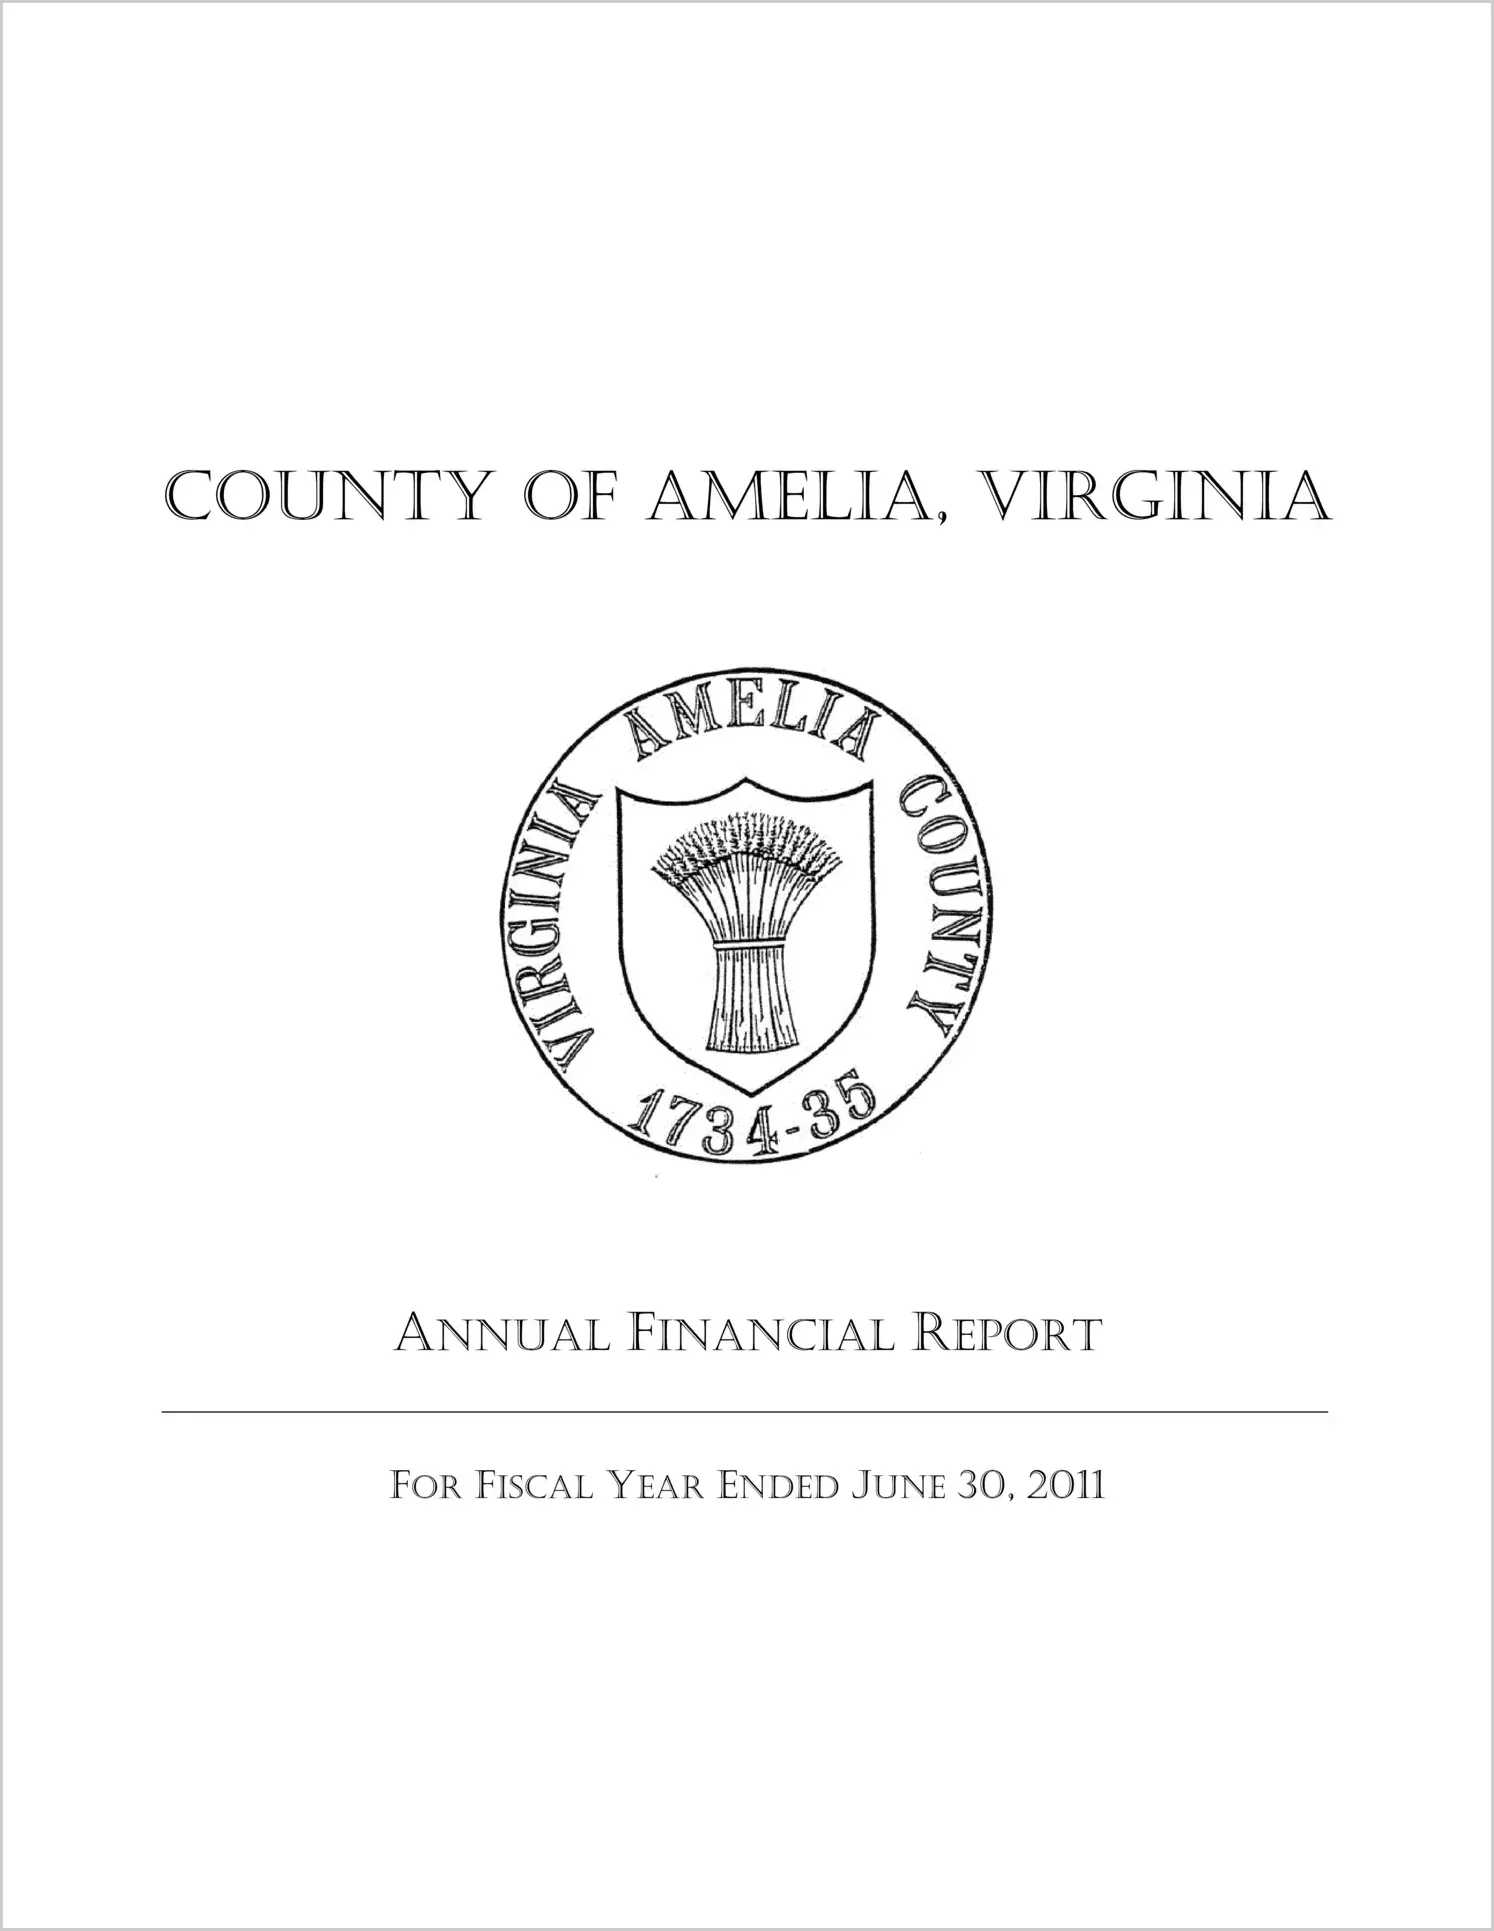 2011 Annual Financial Report for County of Amelia